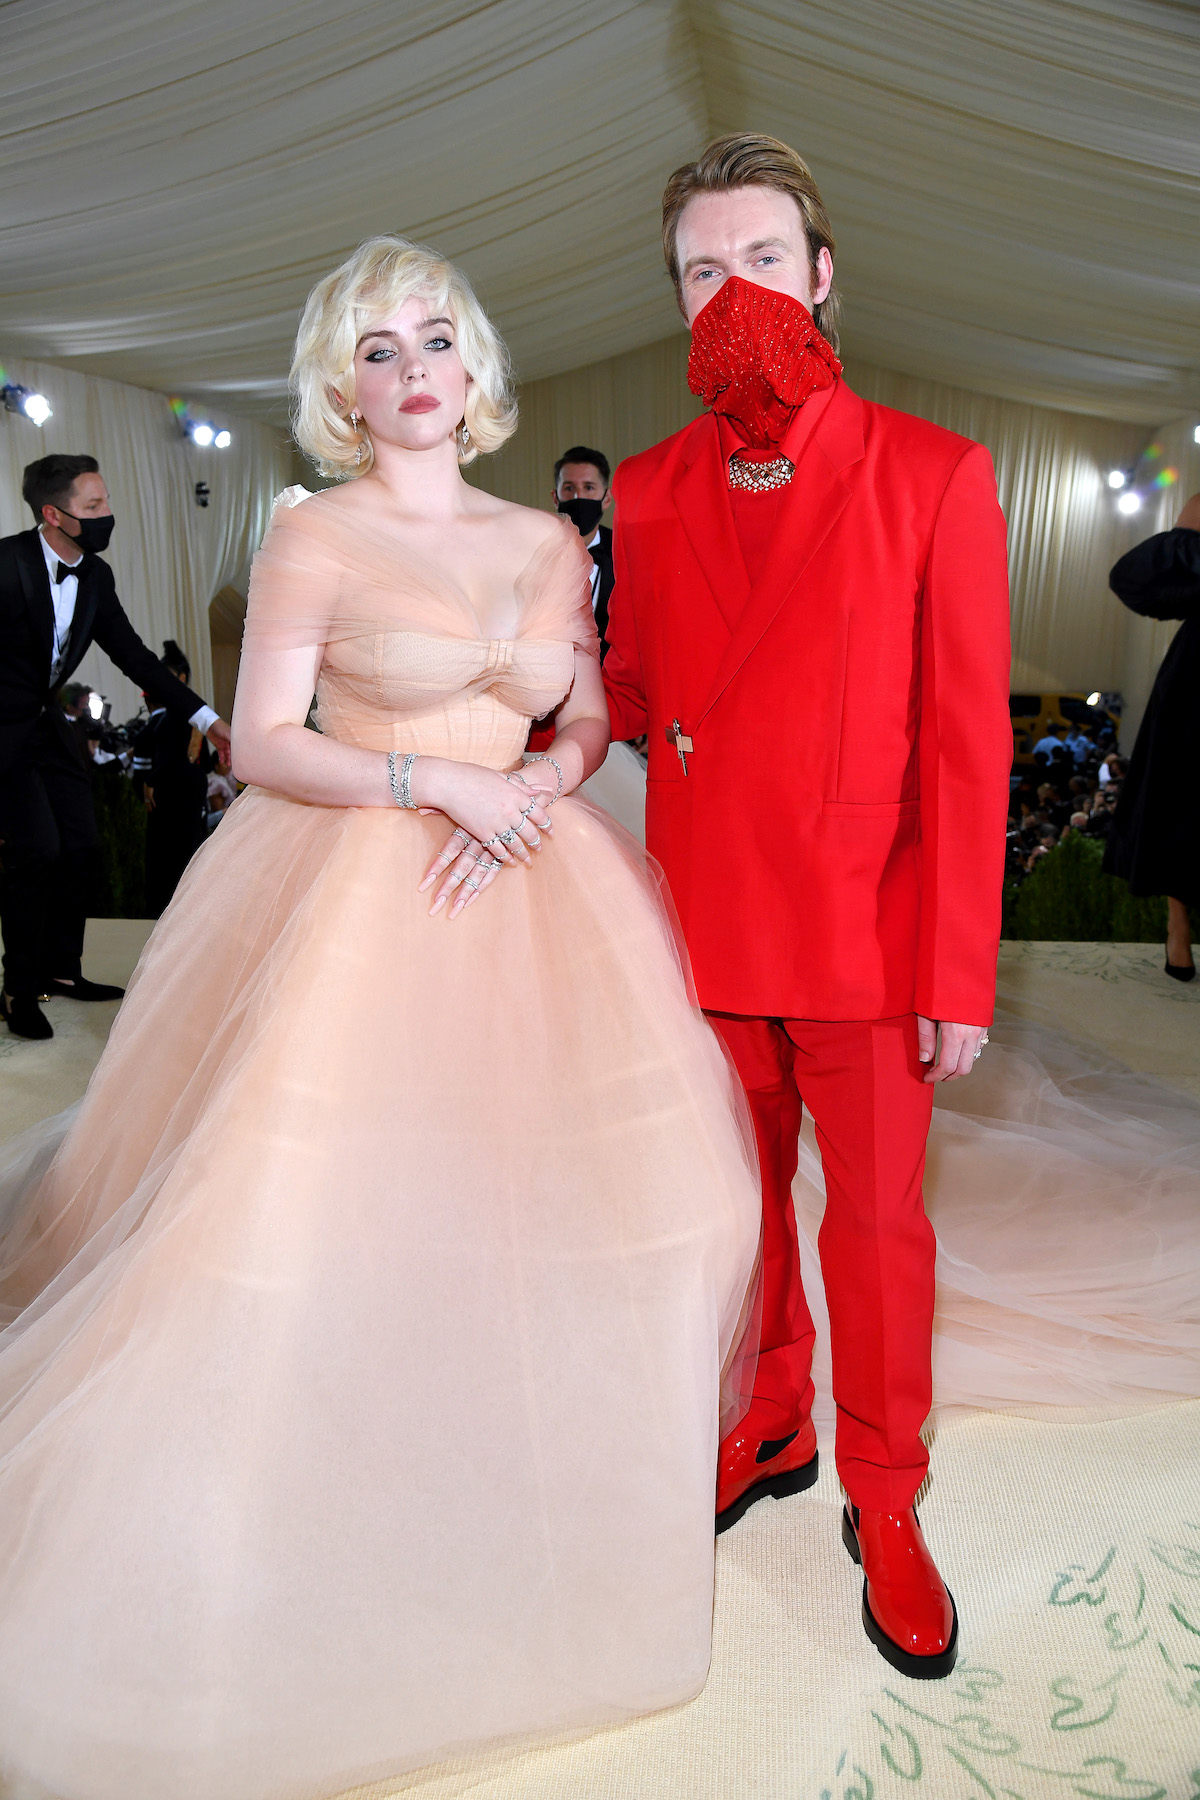 Billie Eilish and Finneas O'Connell pose together at the 2021 Met Gala.